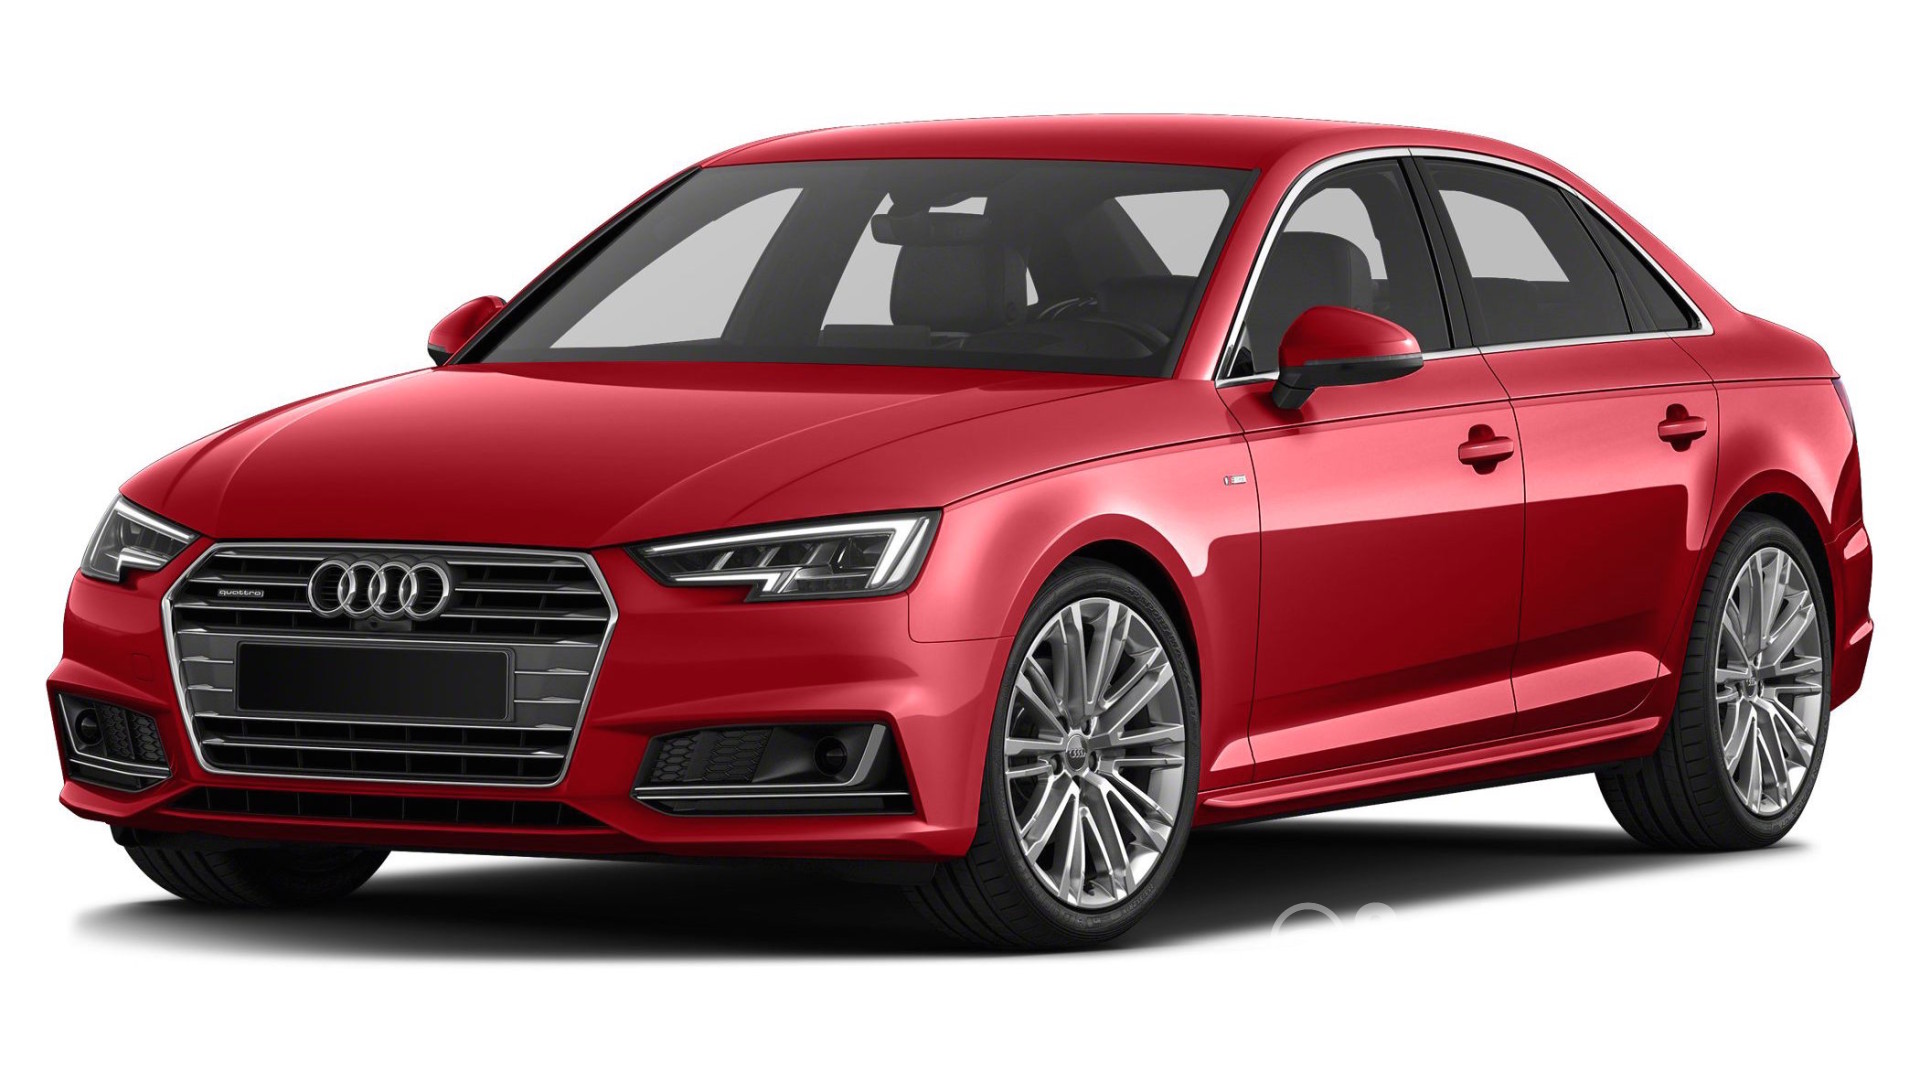 Audi A4 Malaysia Price / Top 5 upcoming entry level luxury cars and